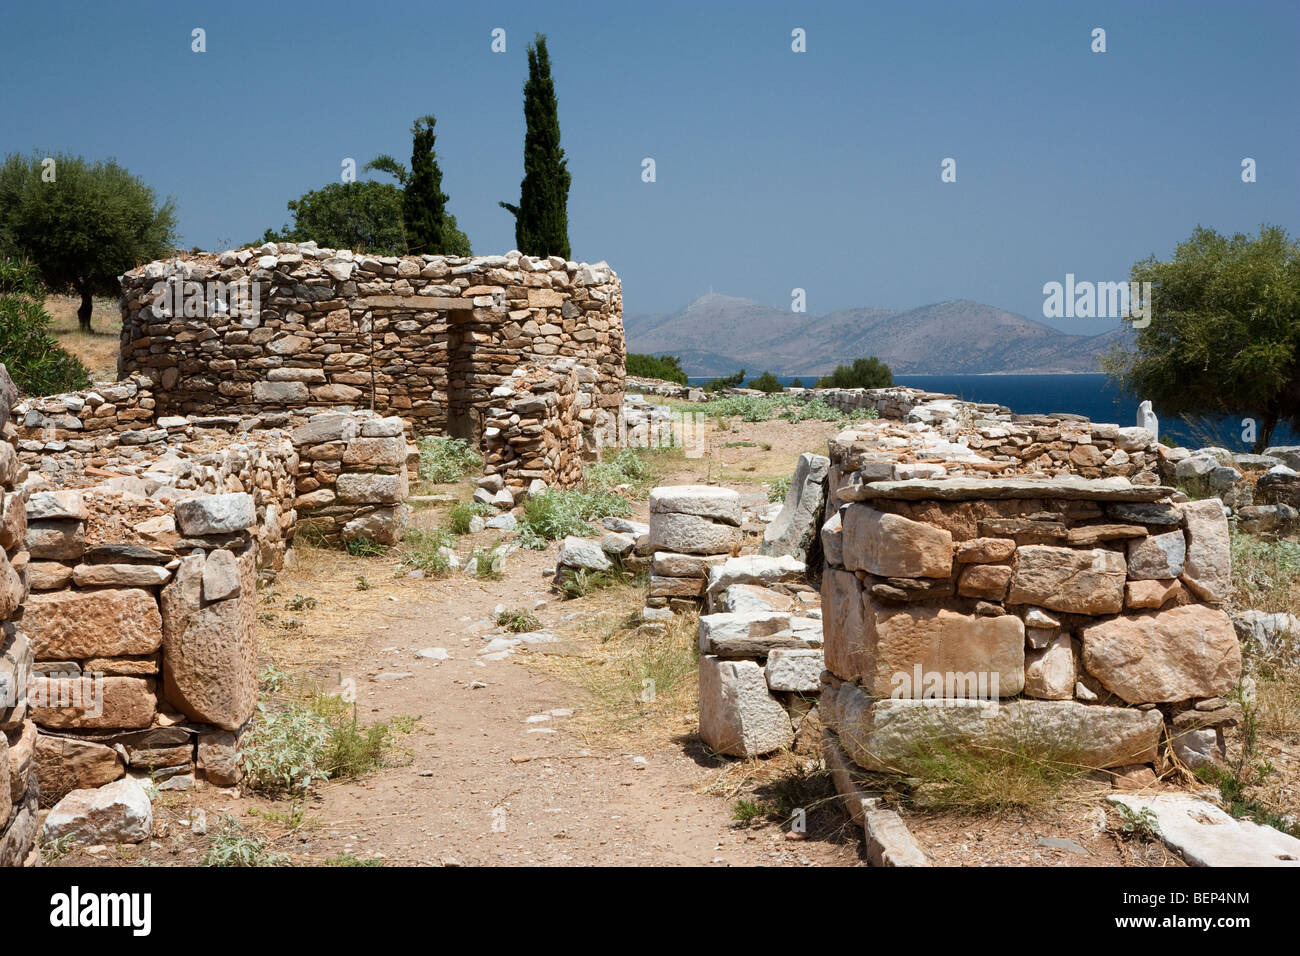 The residential area of Rhamnous, Greece, overlooking the Gulf of Euboea. Stock Photo